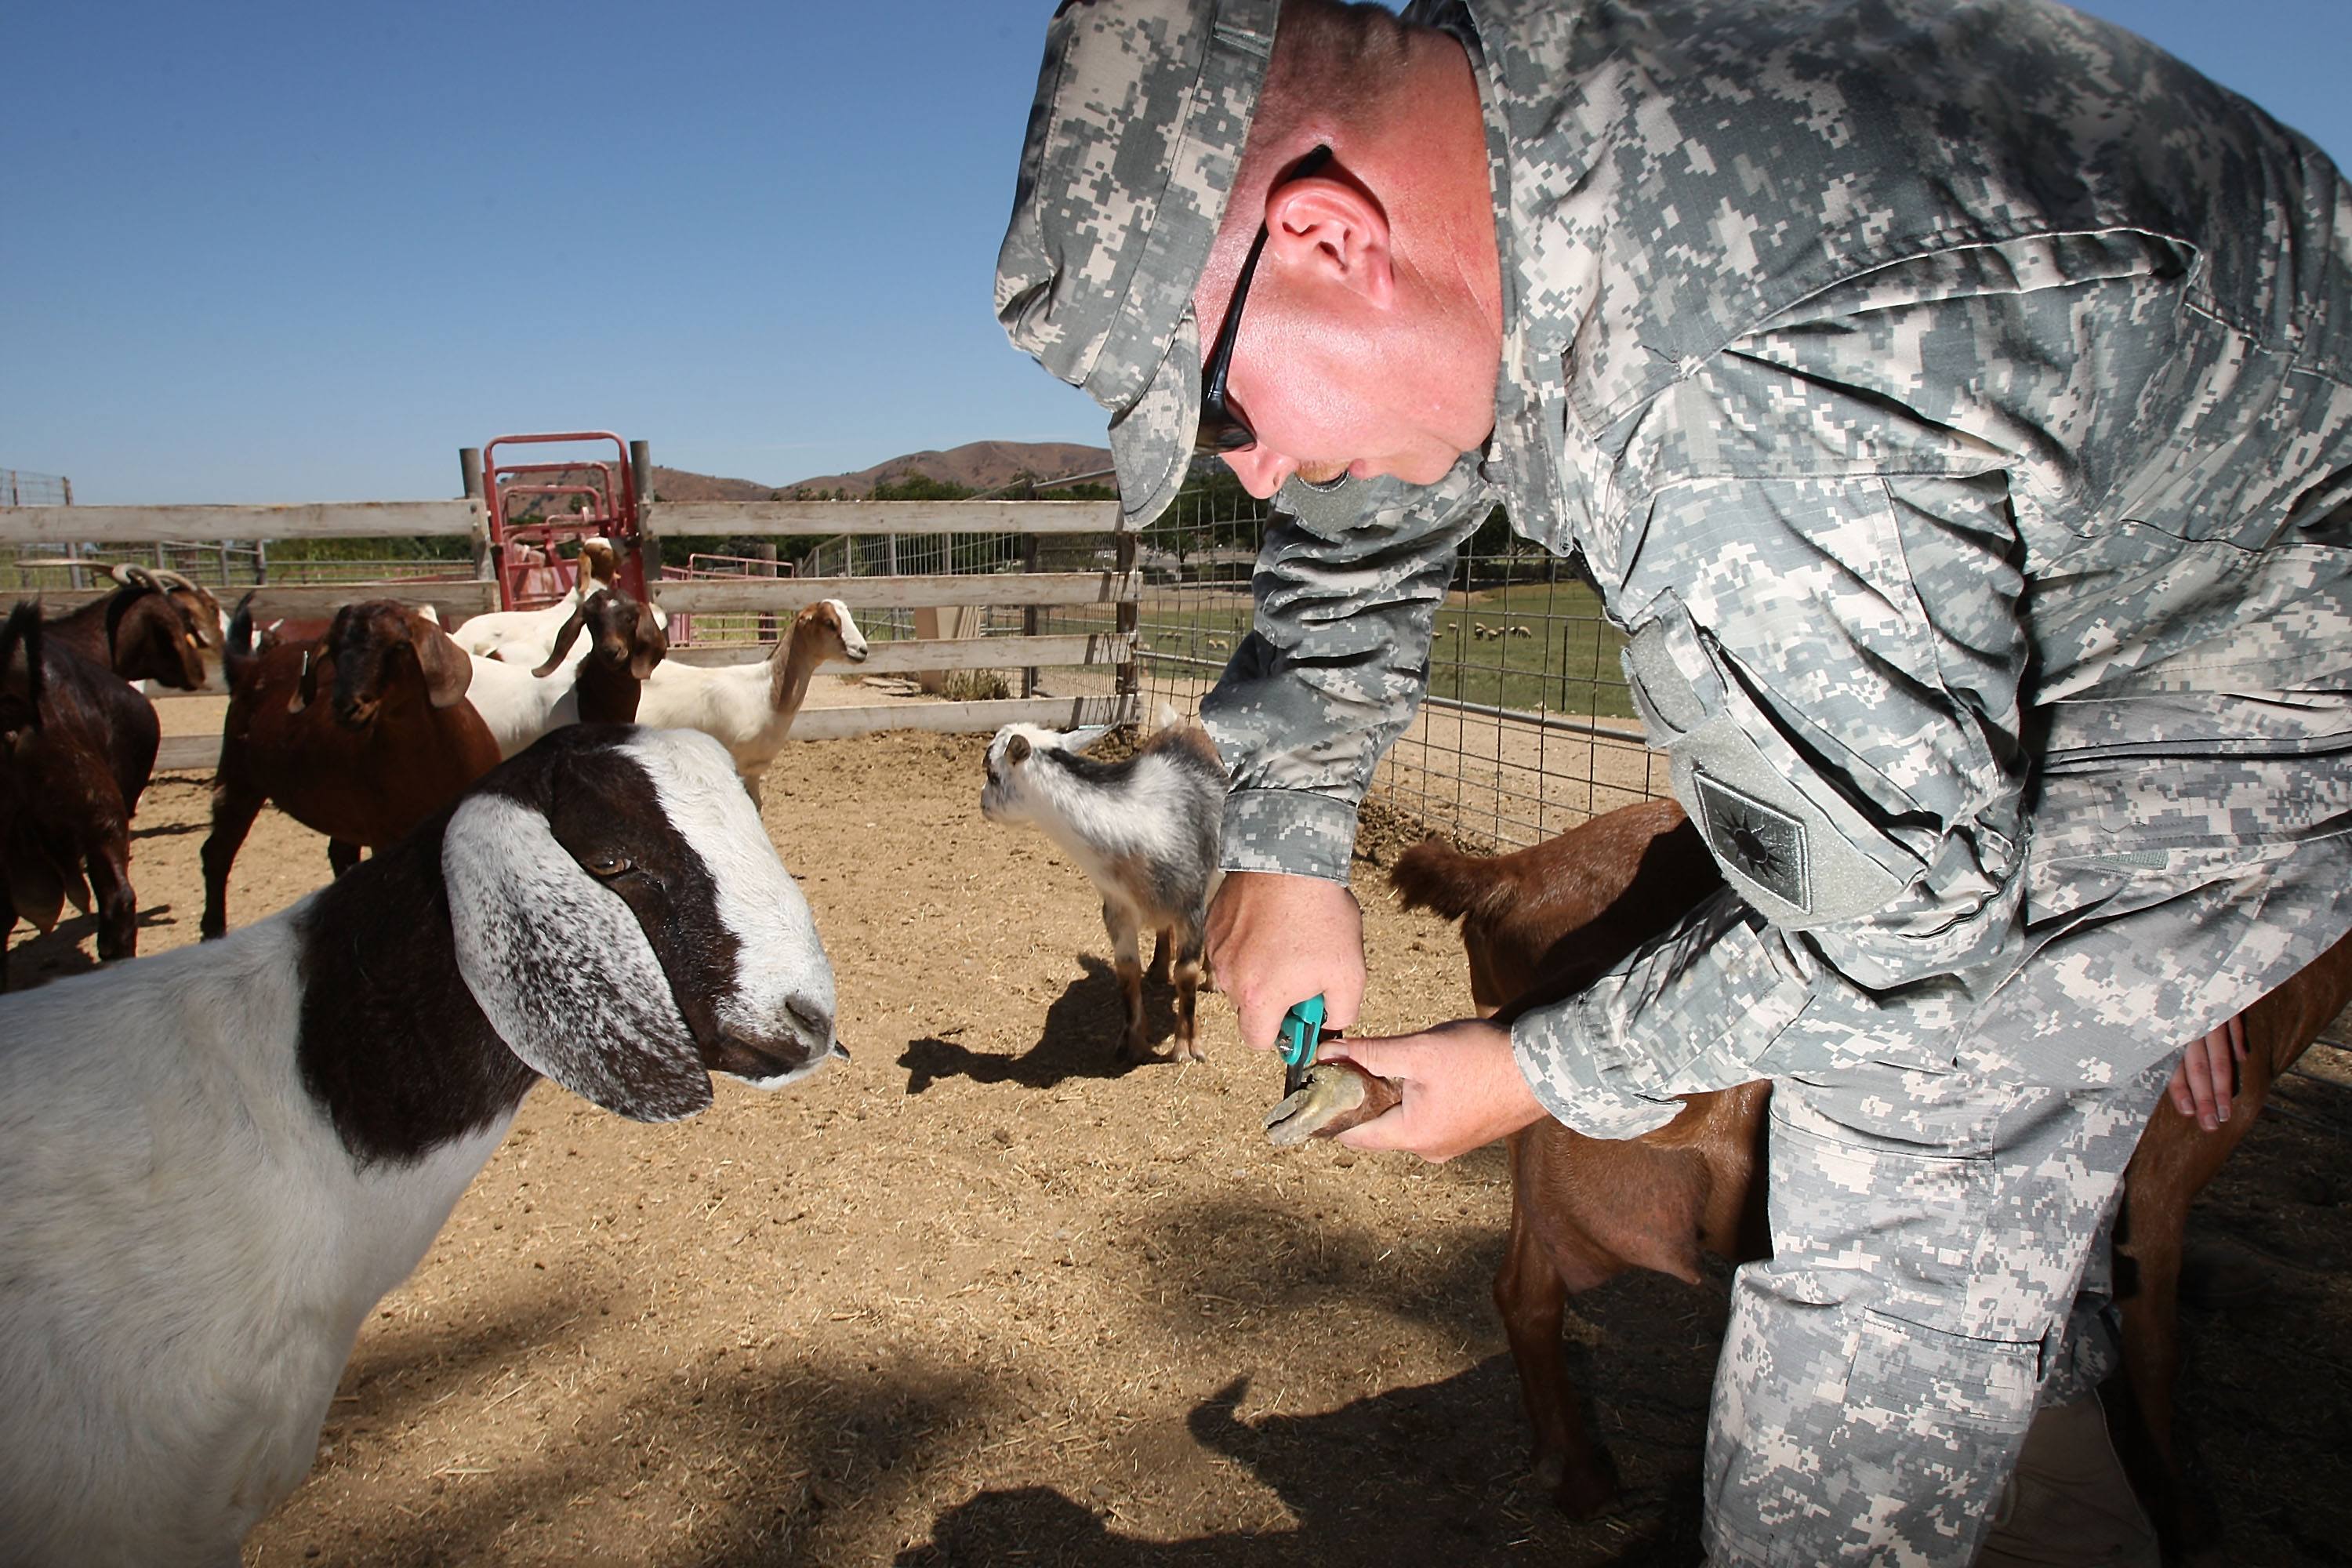 A goat watches Staff Sgt. Terry Lucas trim the hooves of another goat.